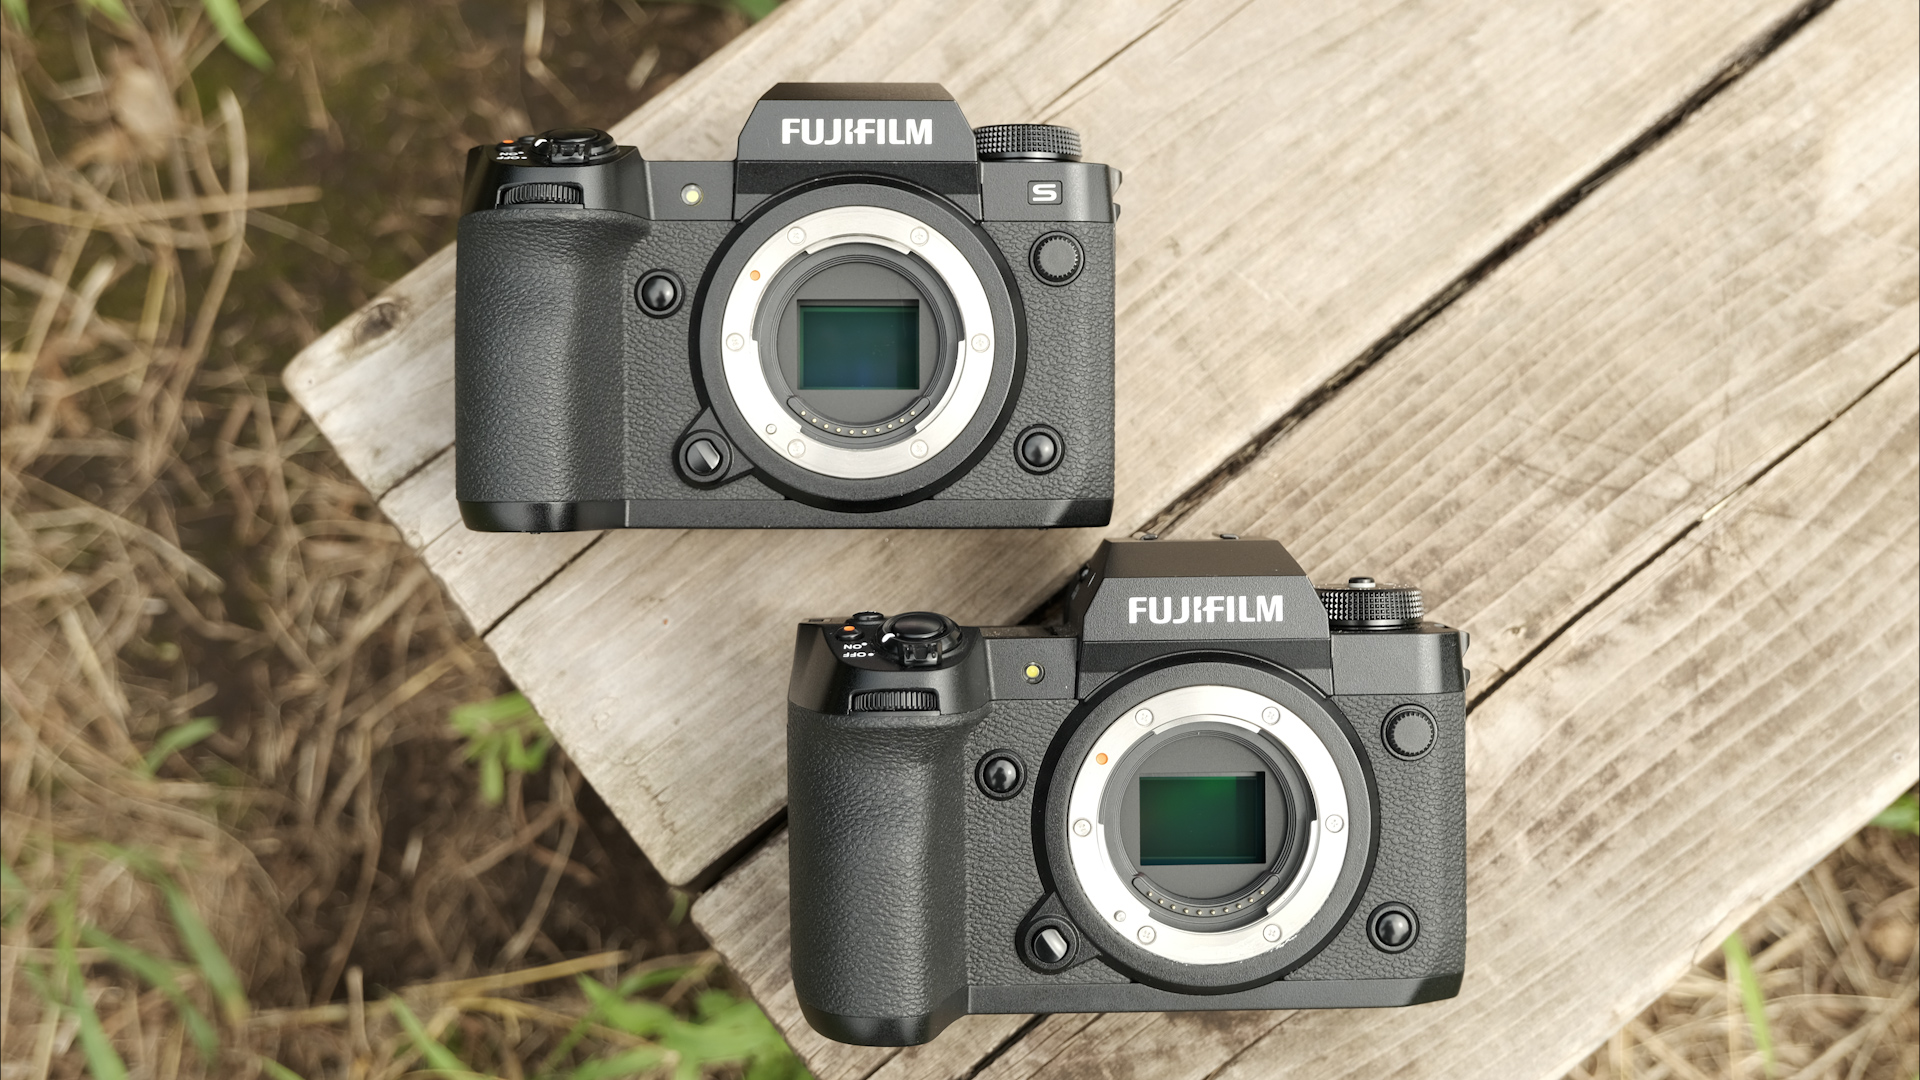 FUJIFILM X-H2 Review - Are We Looking at the APS-C Mirrorless Camera the Year? | CineD